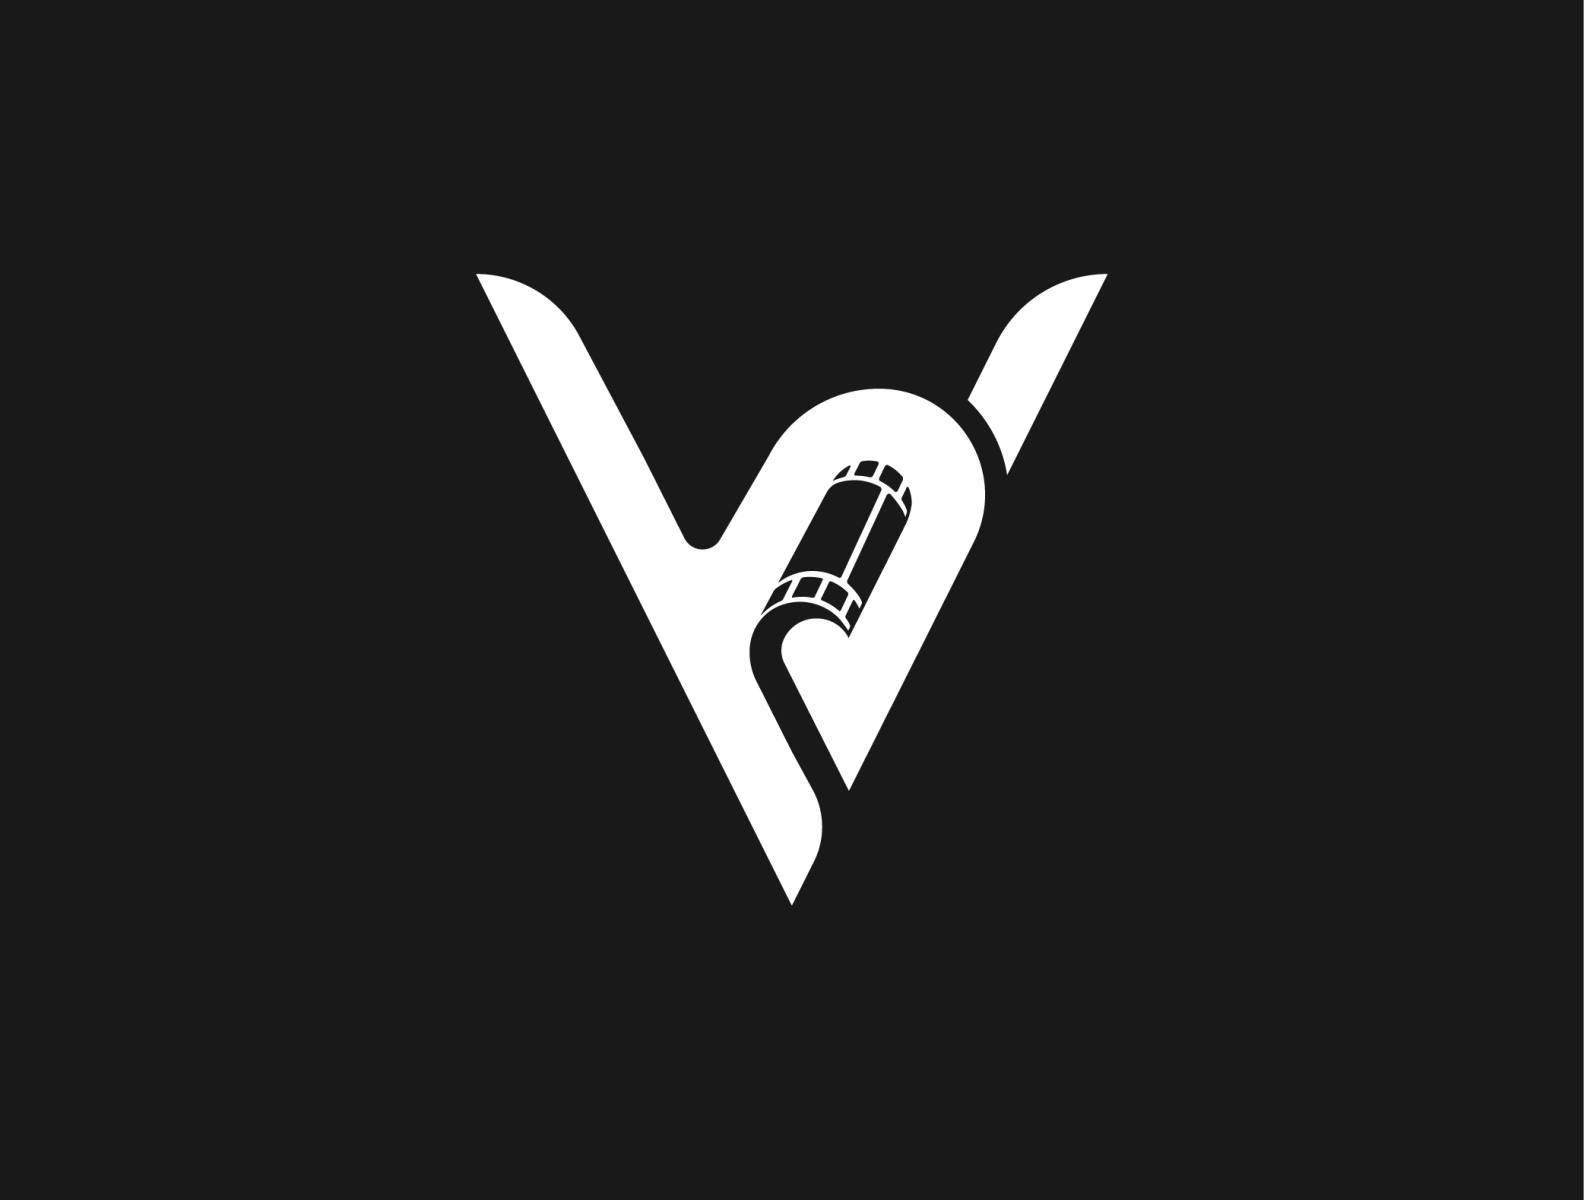 vb-logo-by-mithil-lad-on-dribbble